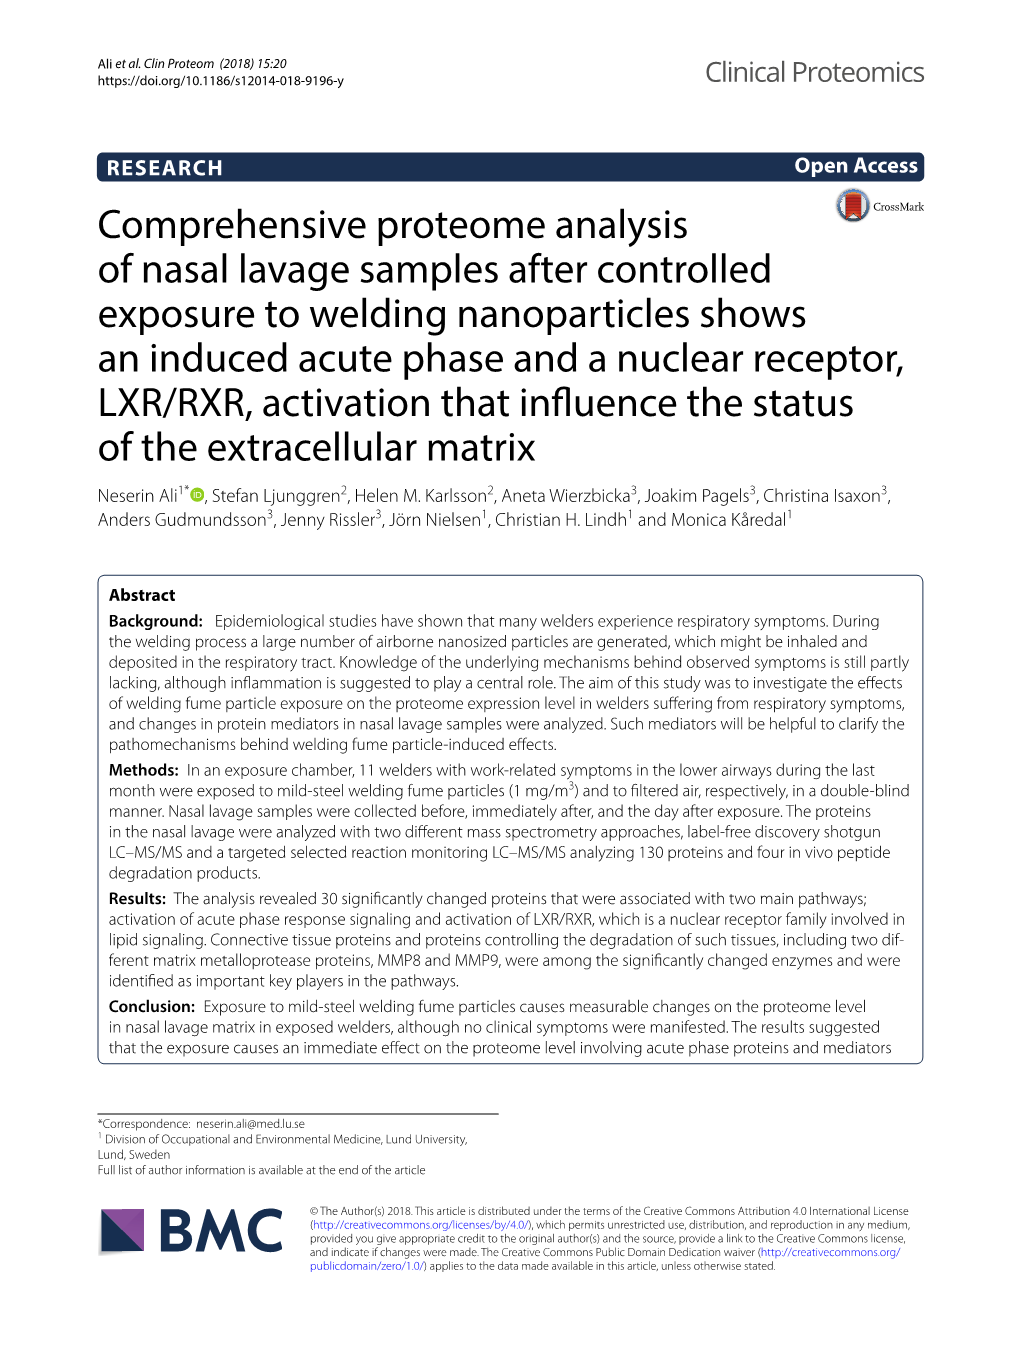 Comprehensive Proteome Analysis of Nasal Lavage Samples After